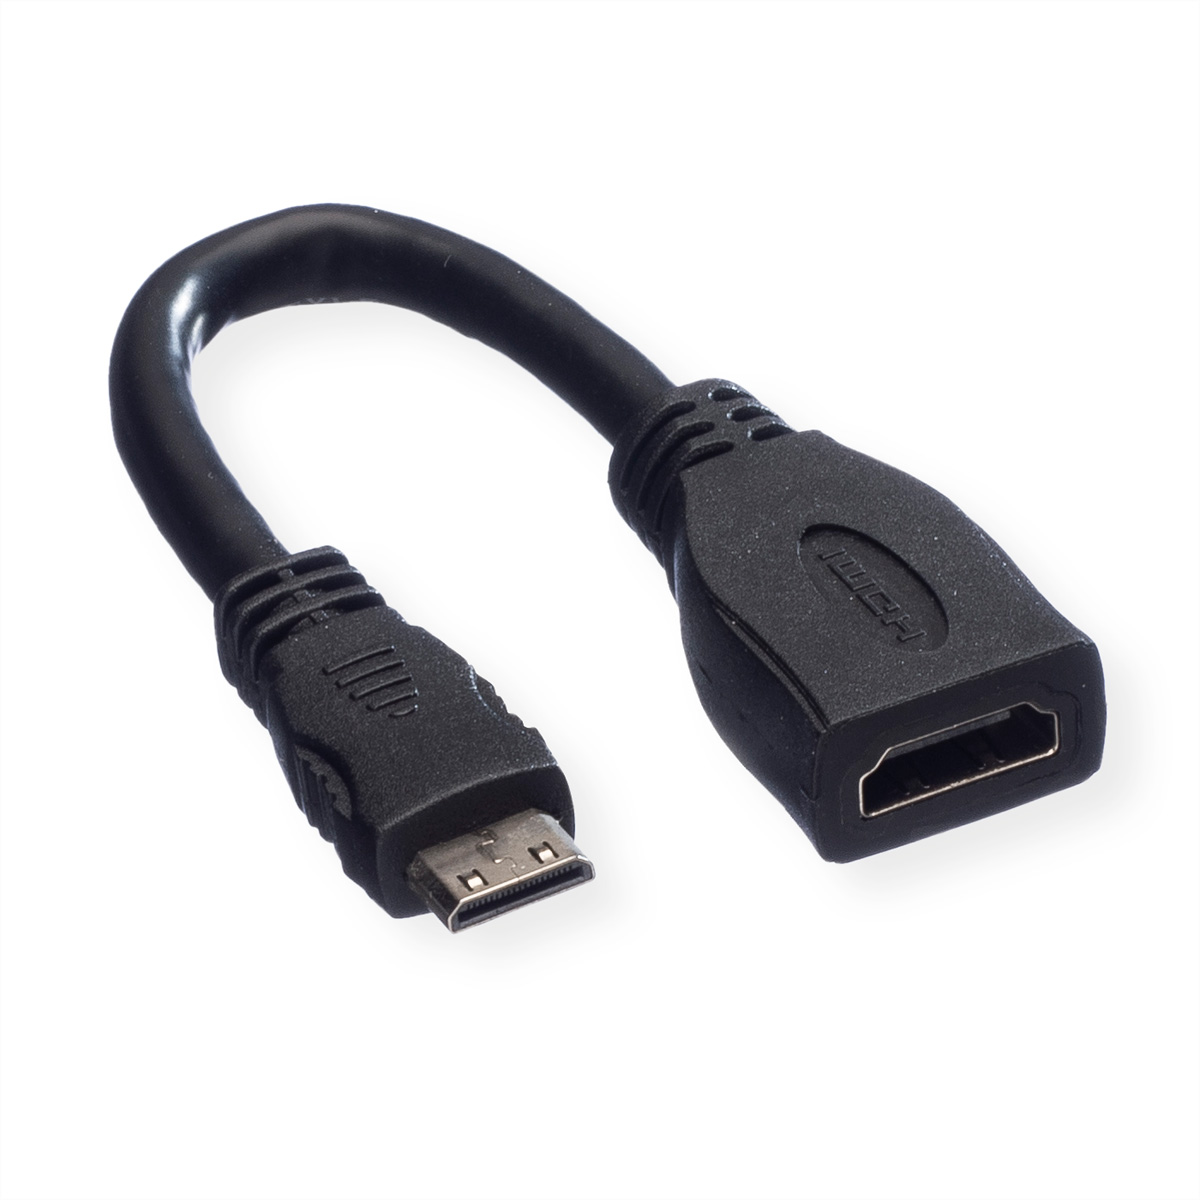 VALUE HDMI Ethernet HDMI with mit High Speed BU Kabel - High HDMI HDMI Kabel Ethernet, ST Mini Mini Speed